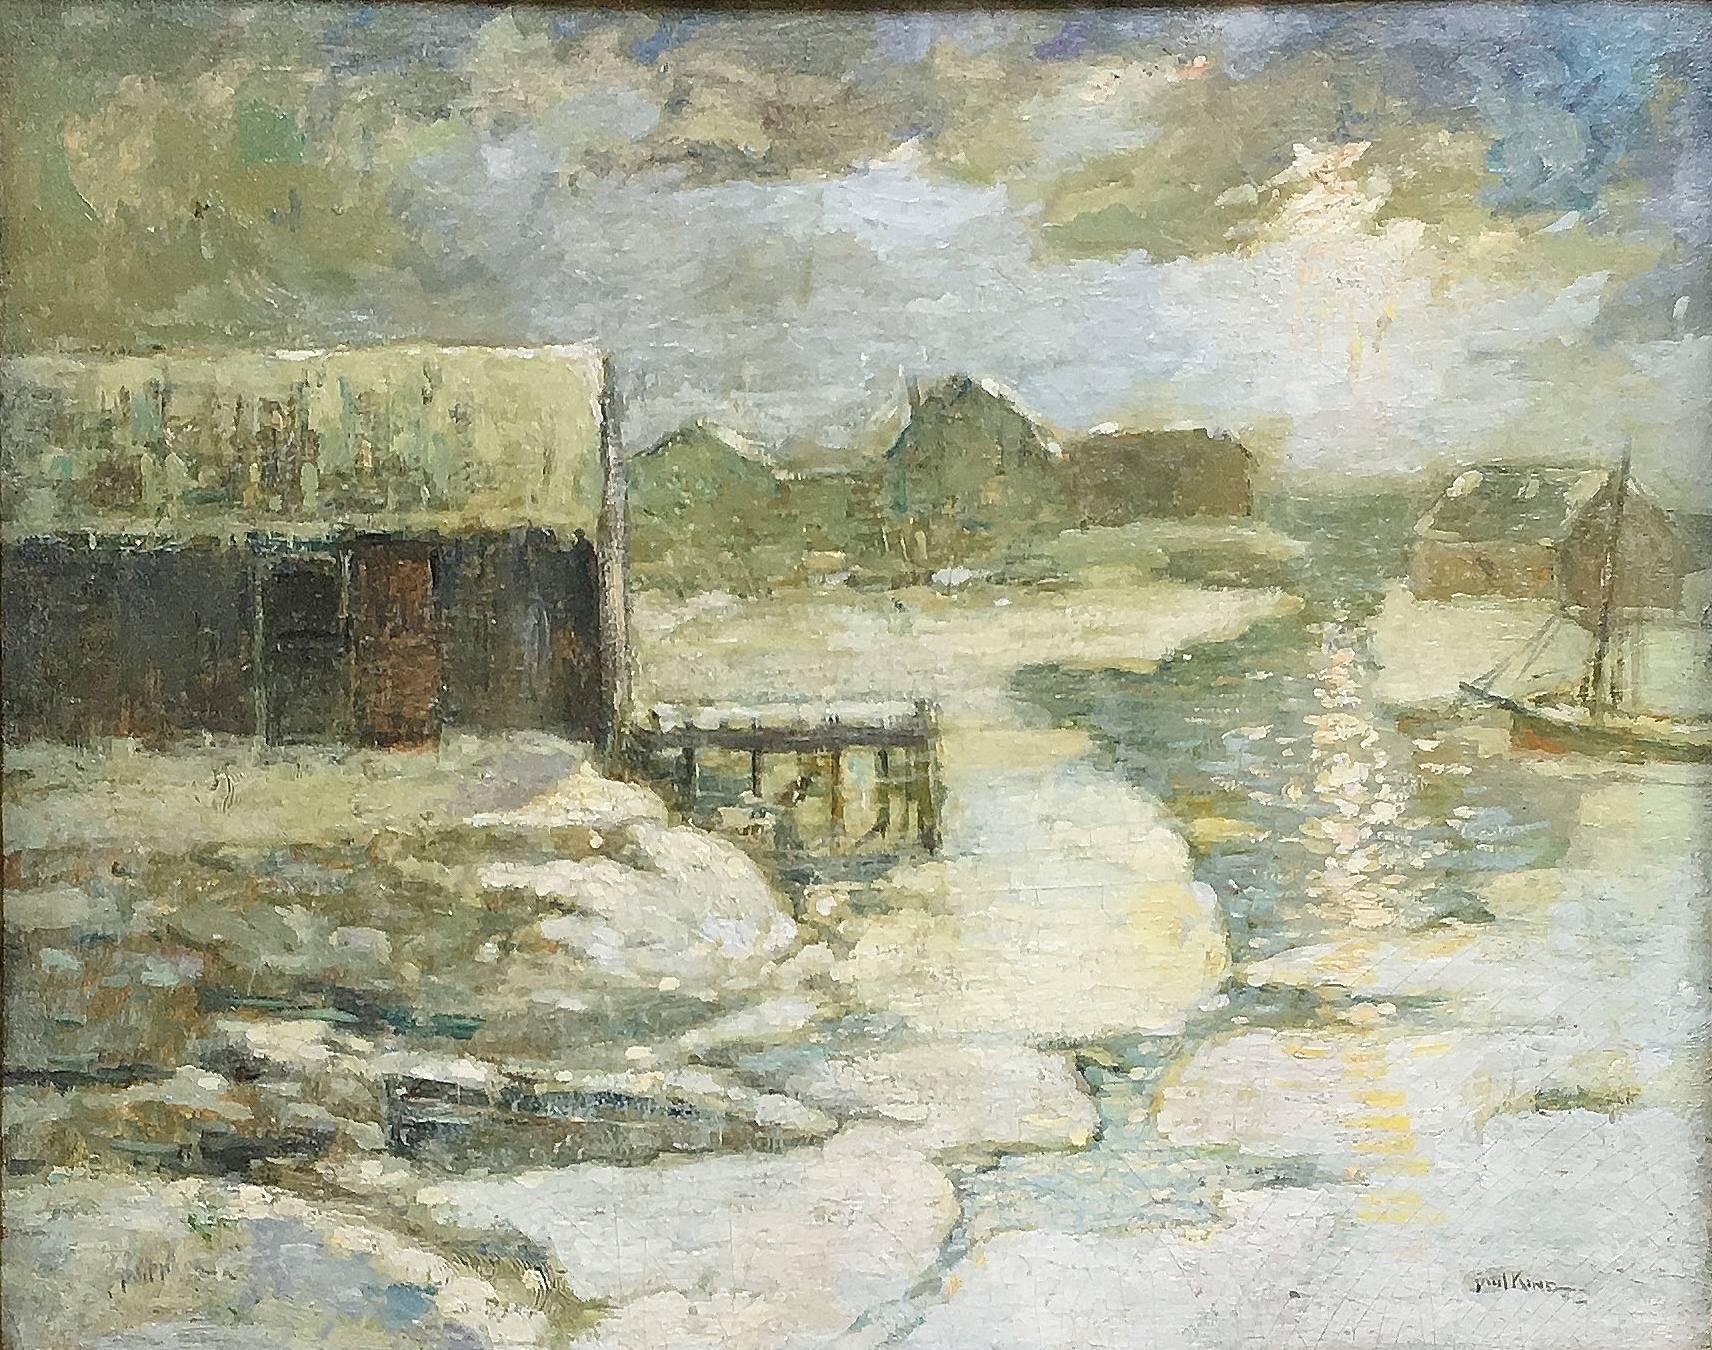 Paul Bernard King Landscape Painting - Water and Ice